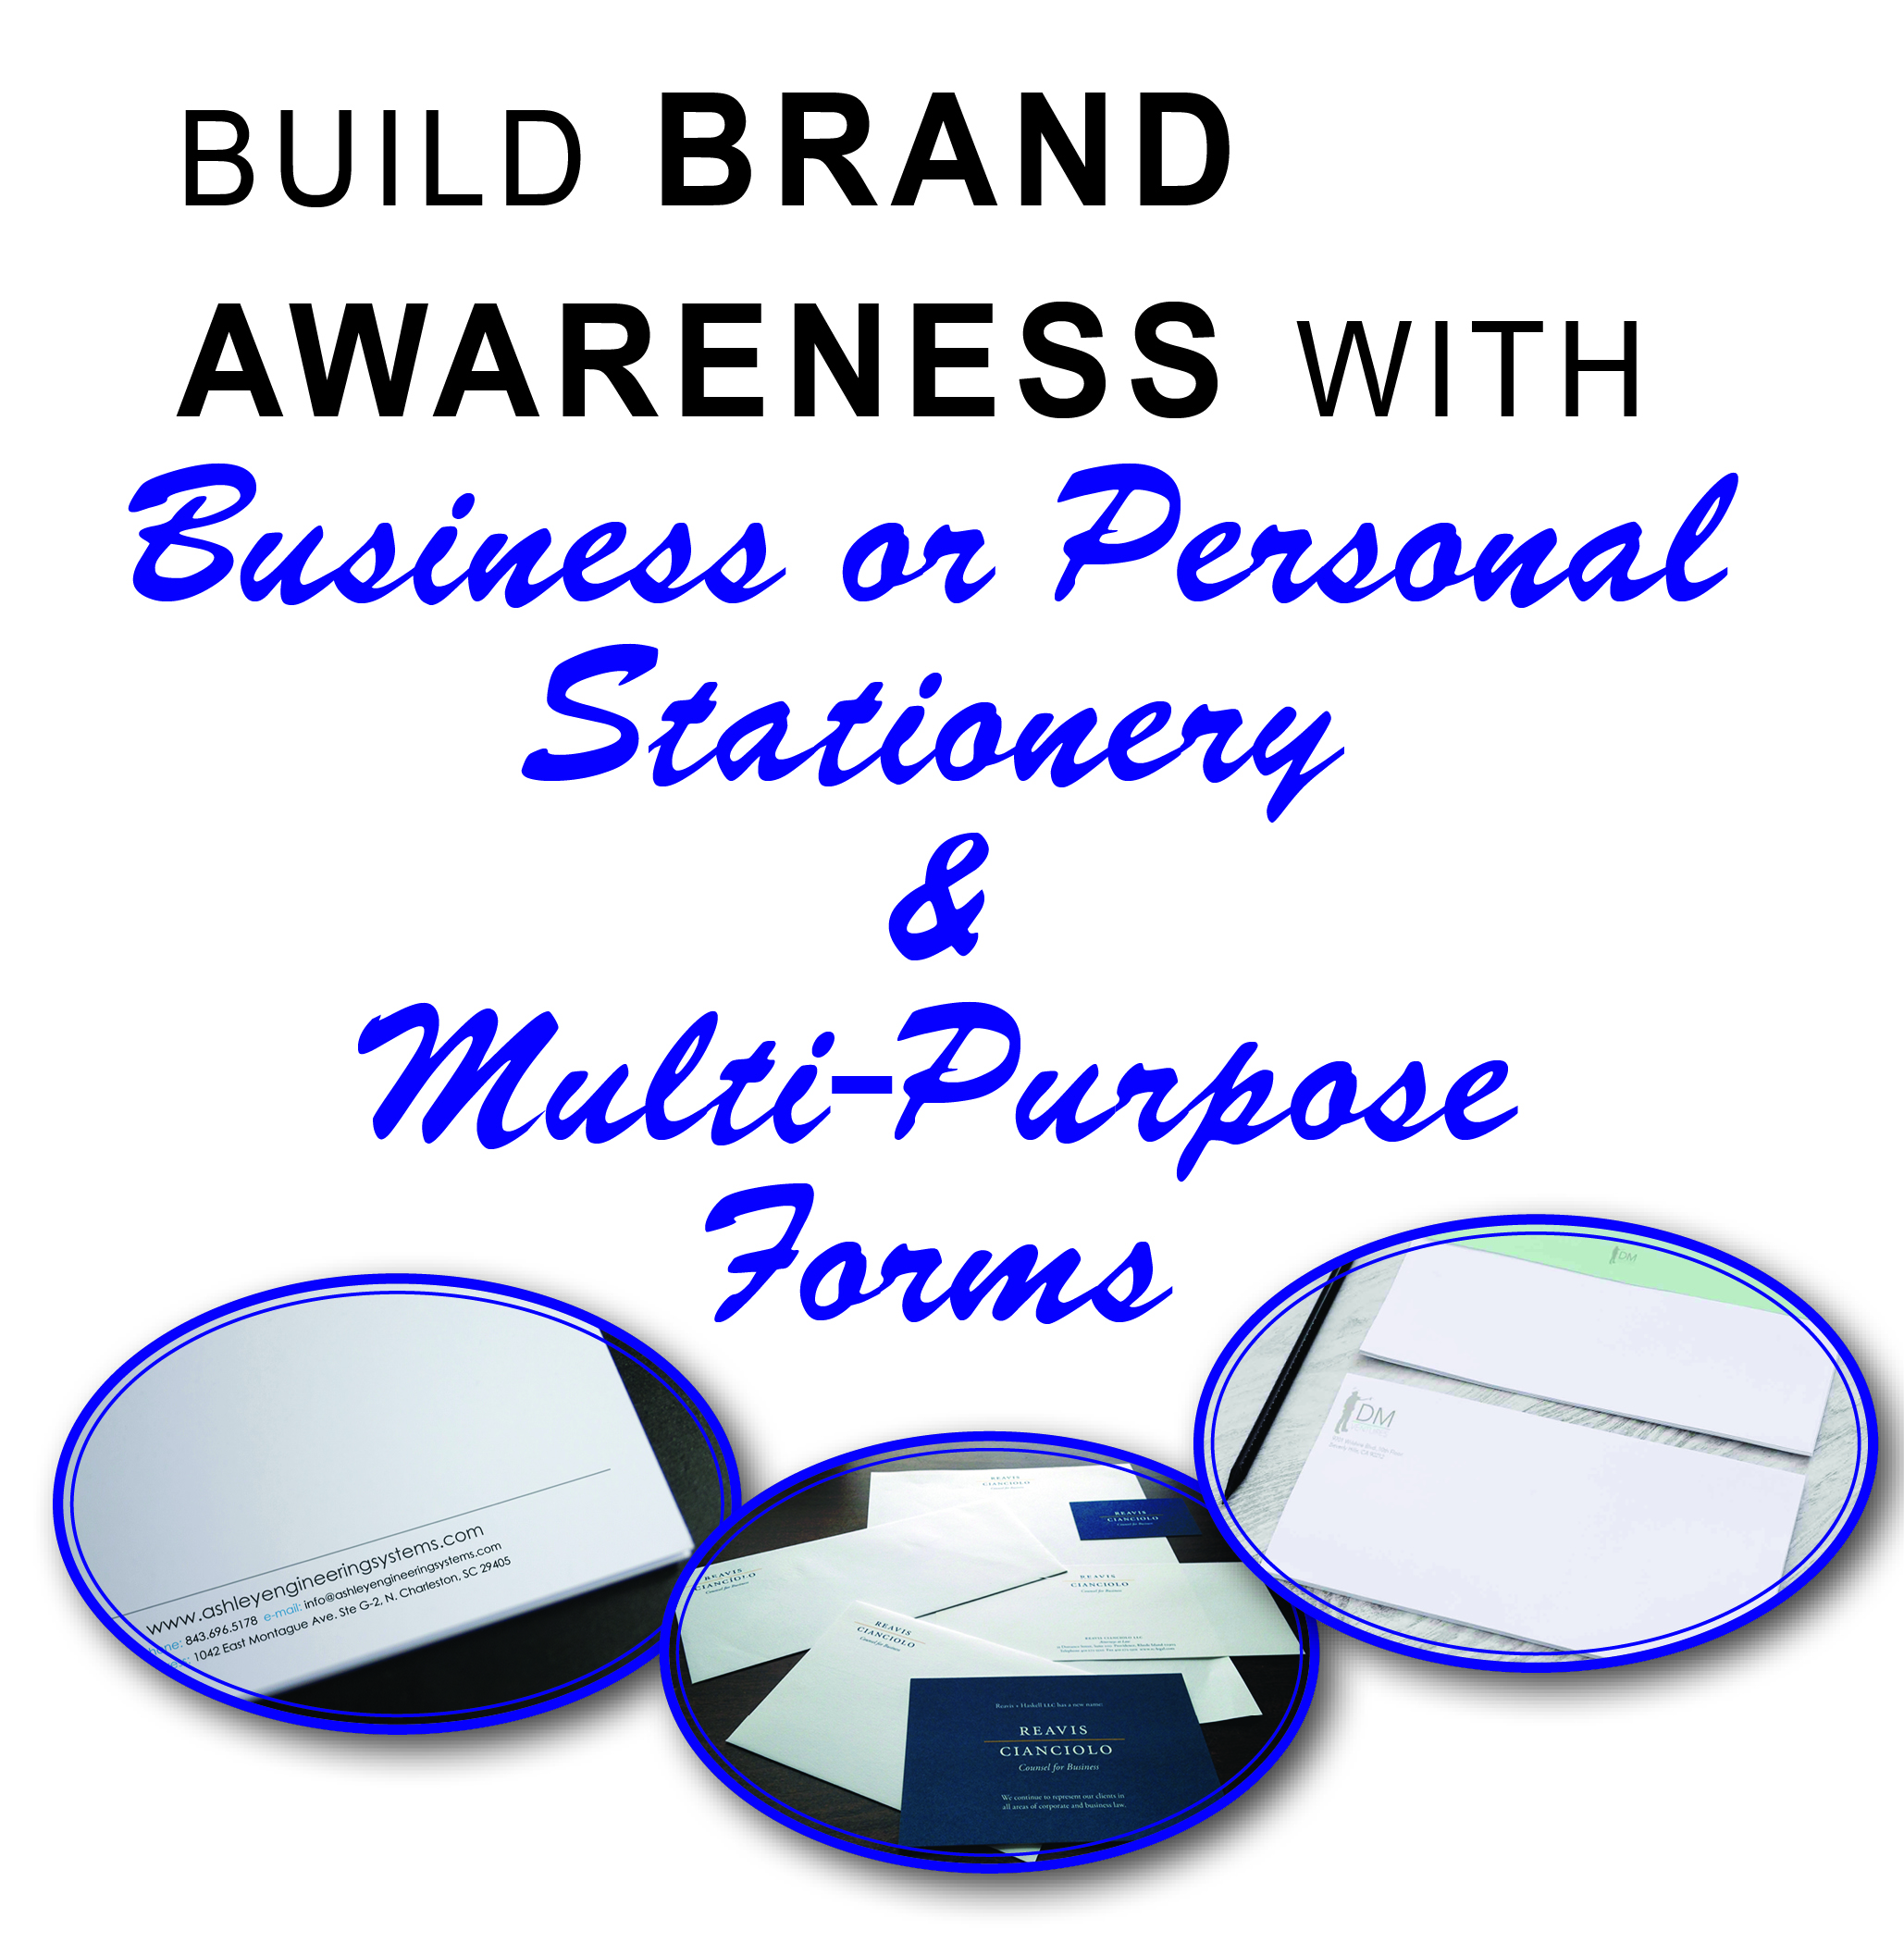 Stationery & Forms | Business or Personal Stationery & Forms - Max Printing and Copy